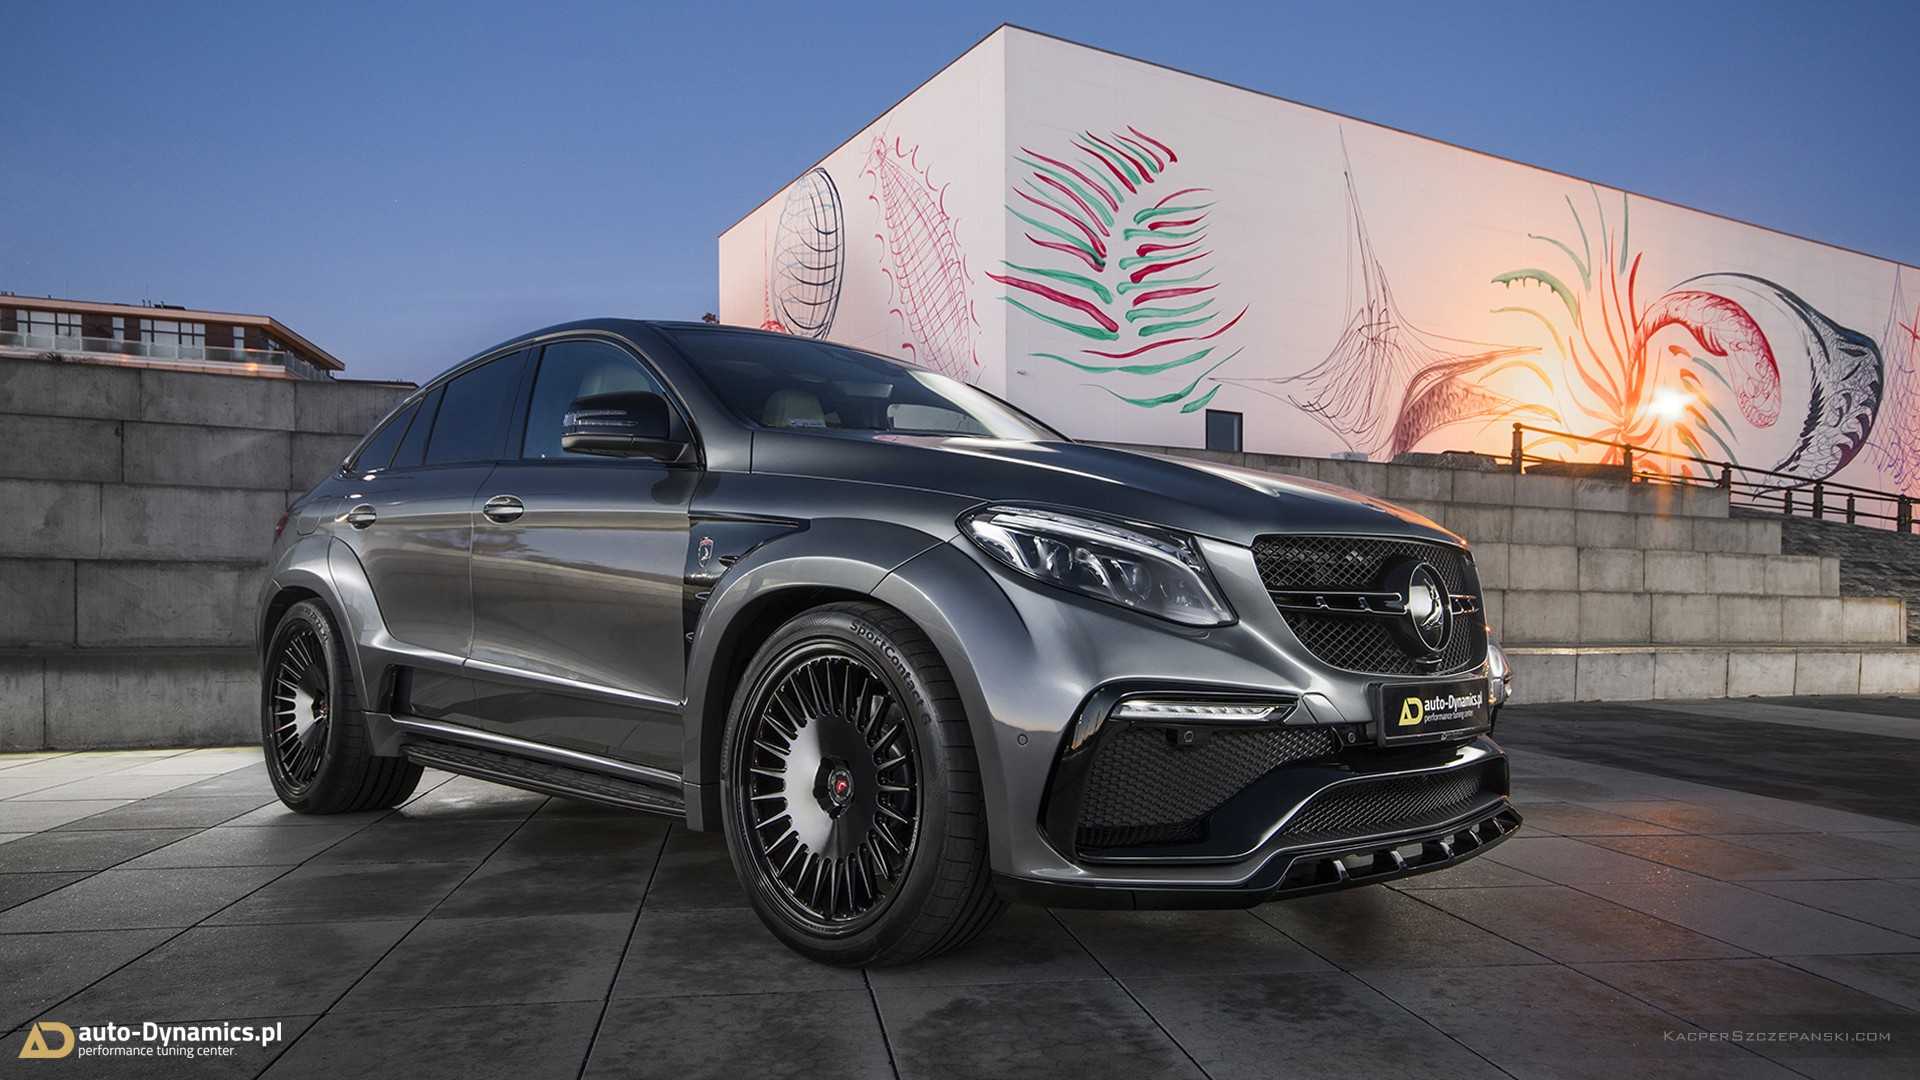 209-MPH Mercedes-AMG GLE 63 S Coupe Project Inferno Has 806 HP